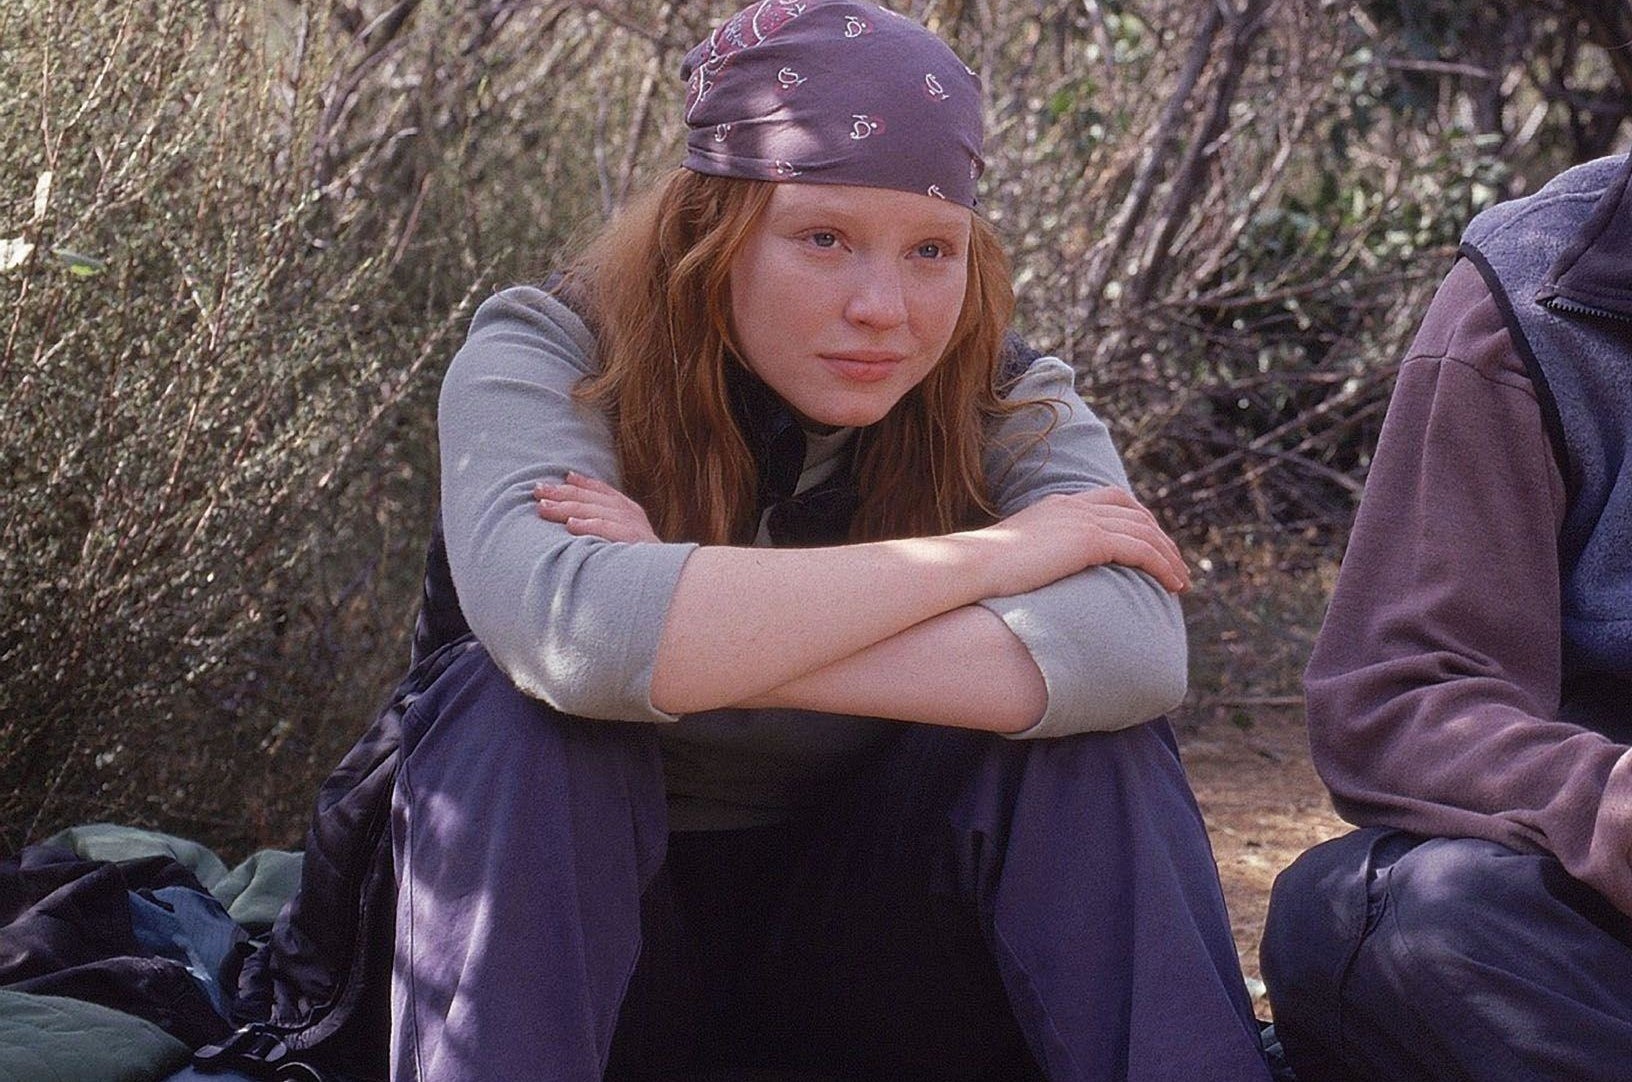 Teen girl sitting down wearing a bandana outside with arms folded